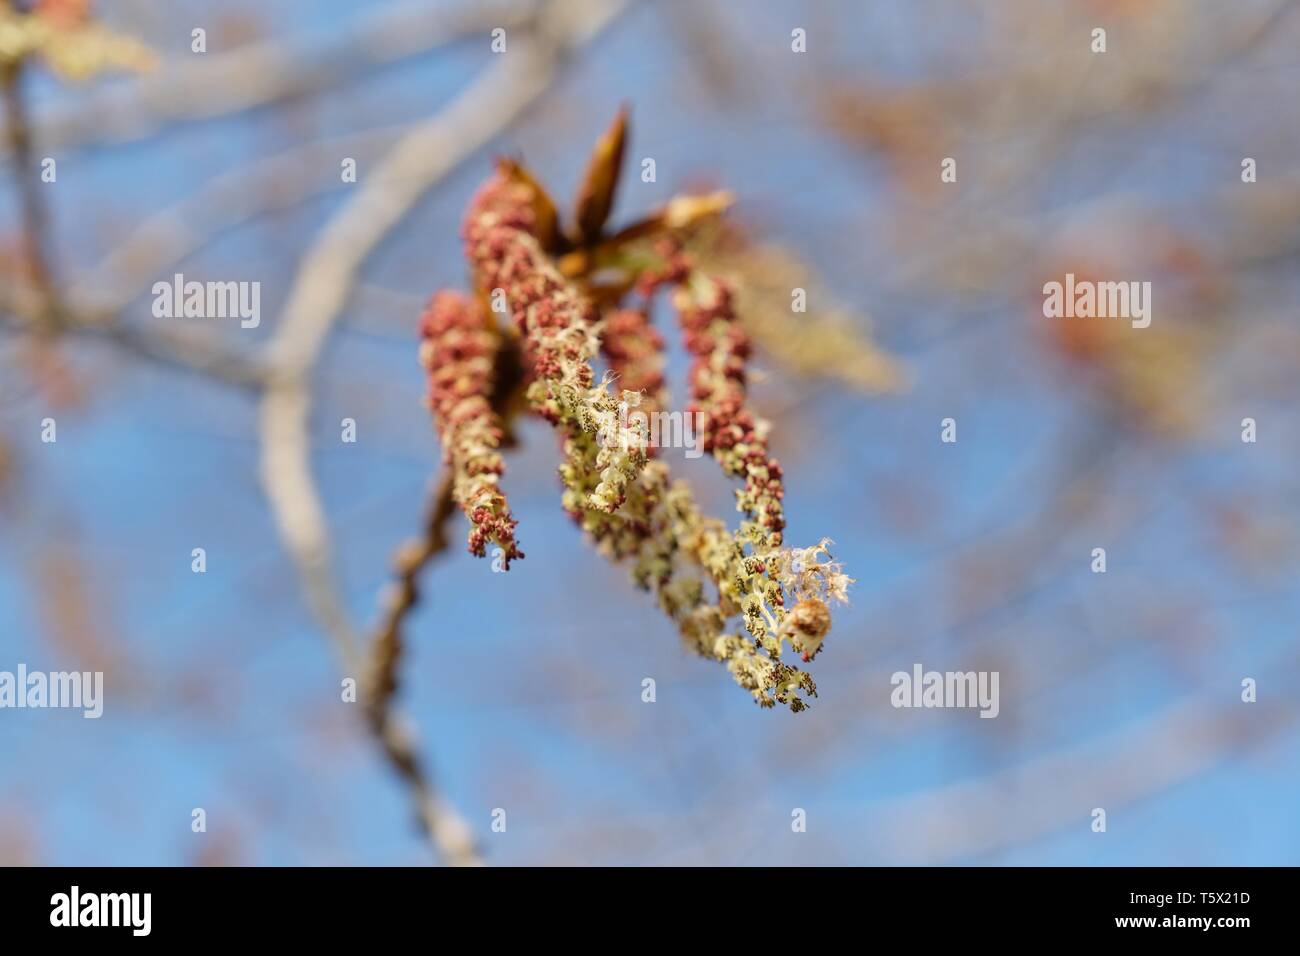 Spring background image, March, April. Poplar tree in bloom, branch closeup background blue clear sky. Stock Photo